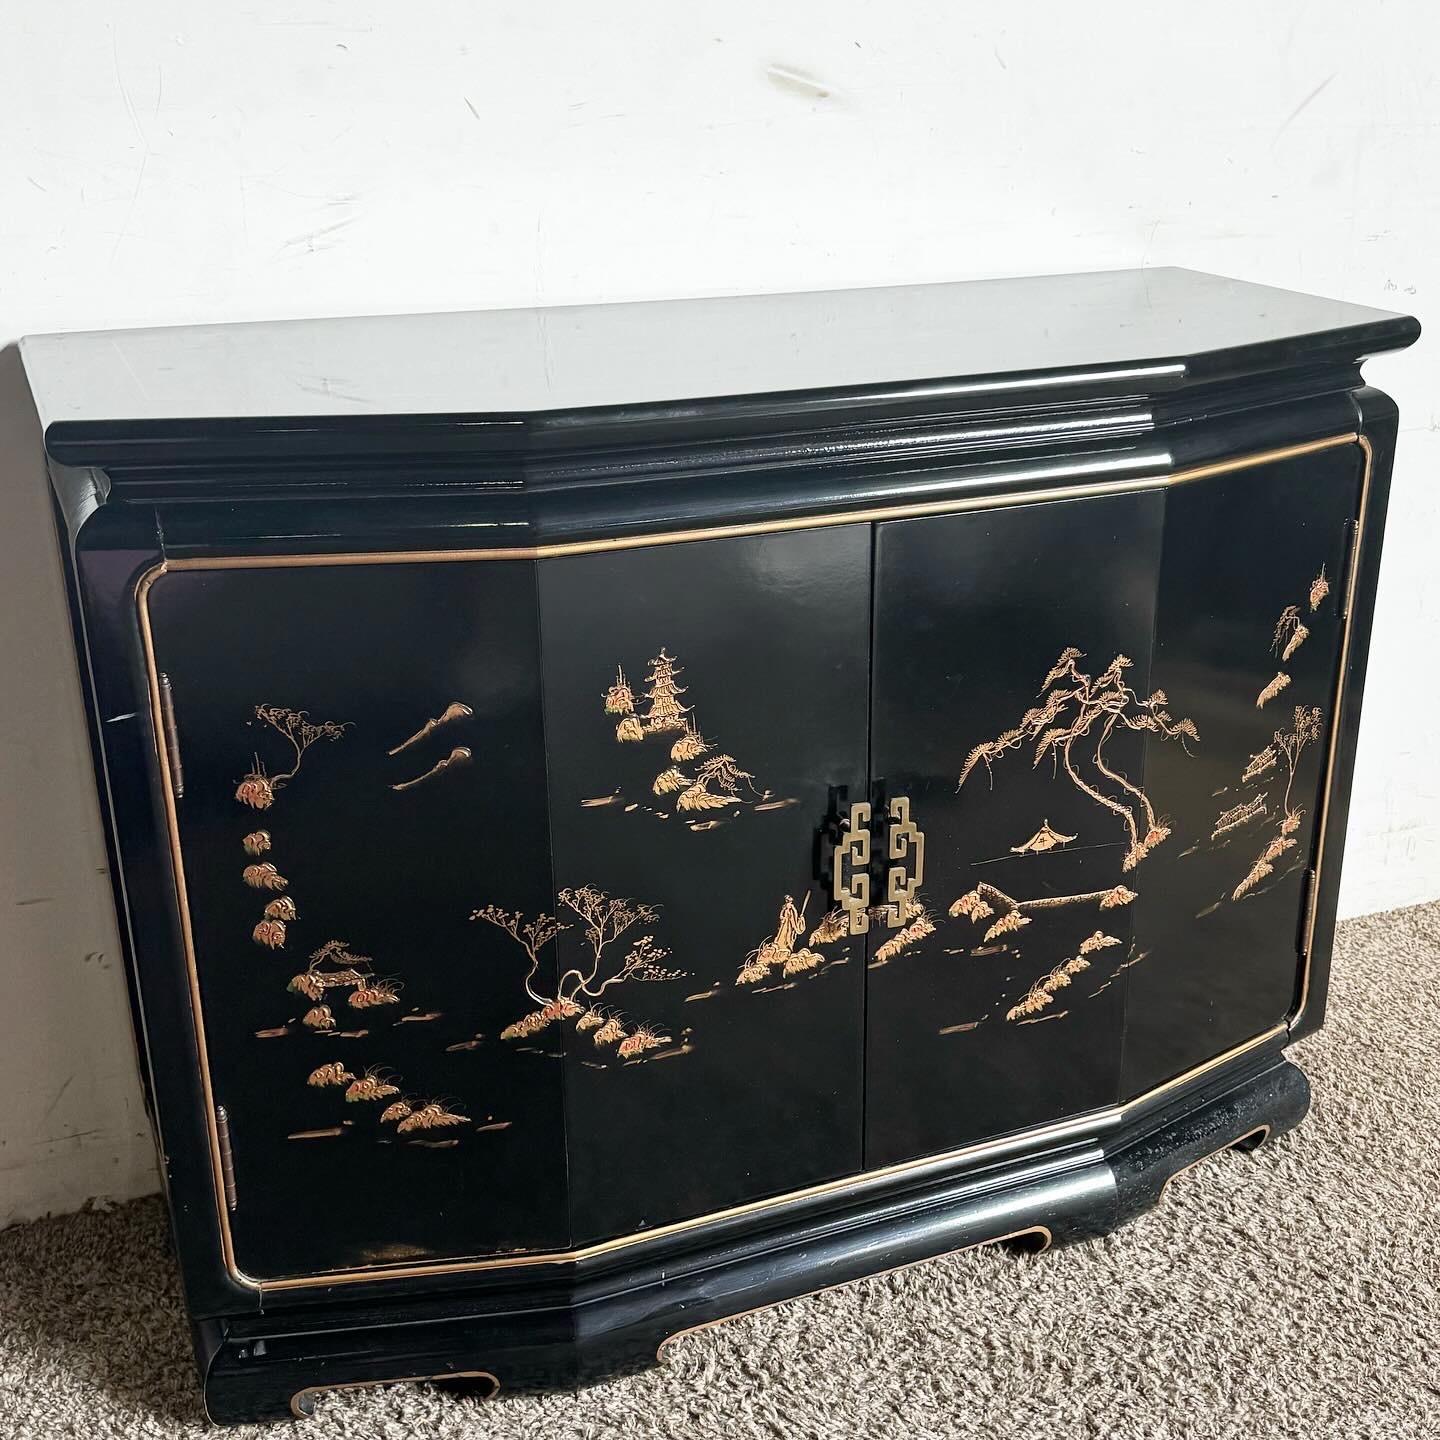 Discover the elegance of Taiwanese craftsmanship with the Black Lacquered and Gold Hand Painted Credenza/Sideboard. Merging rich black lacquer with luxurious gold details, this piece showcases traditional Taiwanese motifs, adding sophistication and